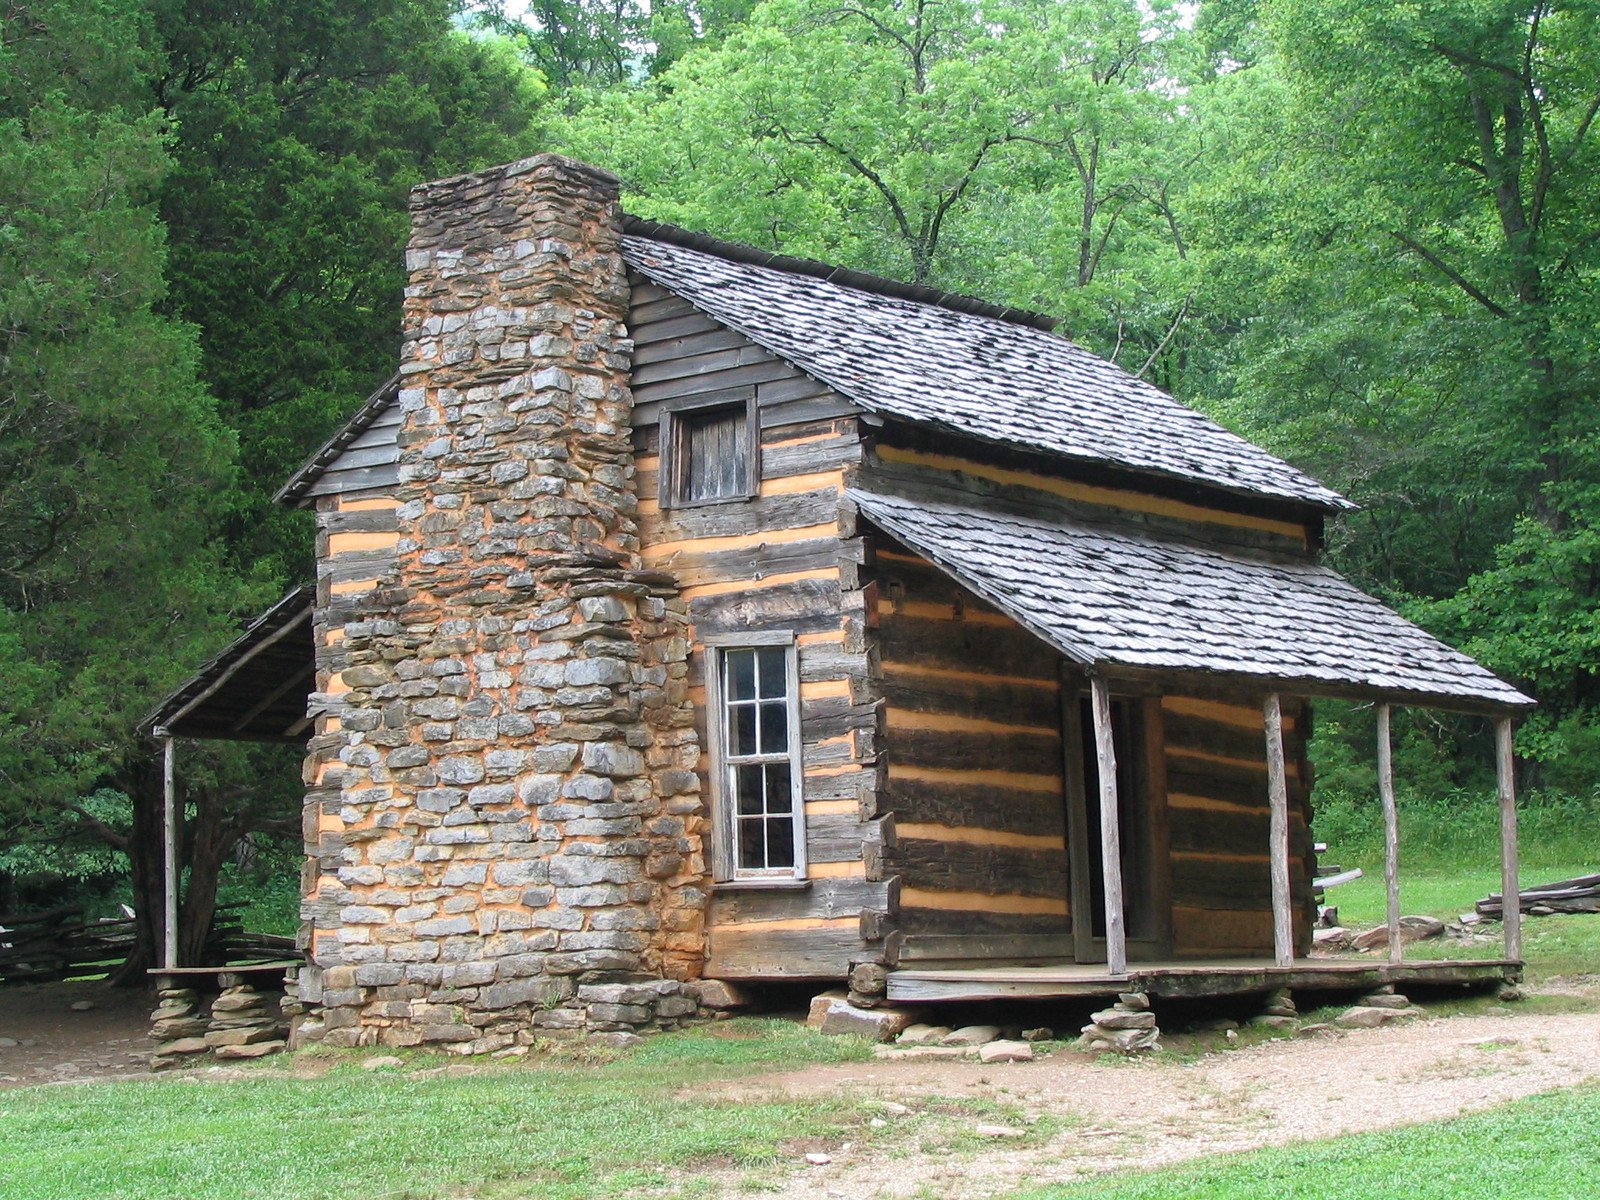 there is an old log cabin that is built into the grass